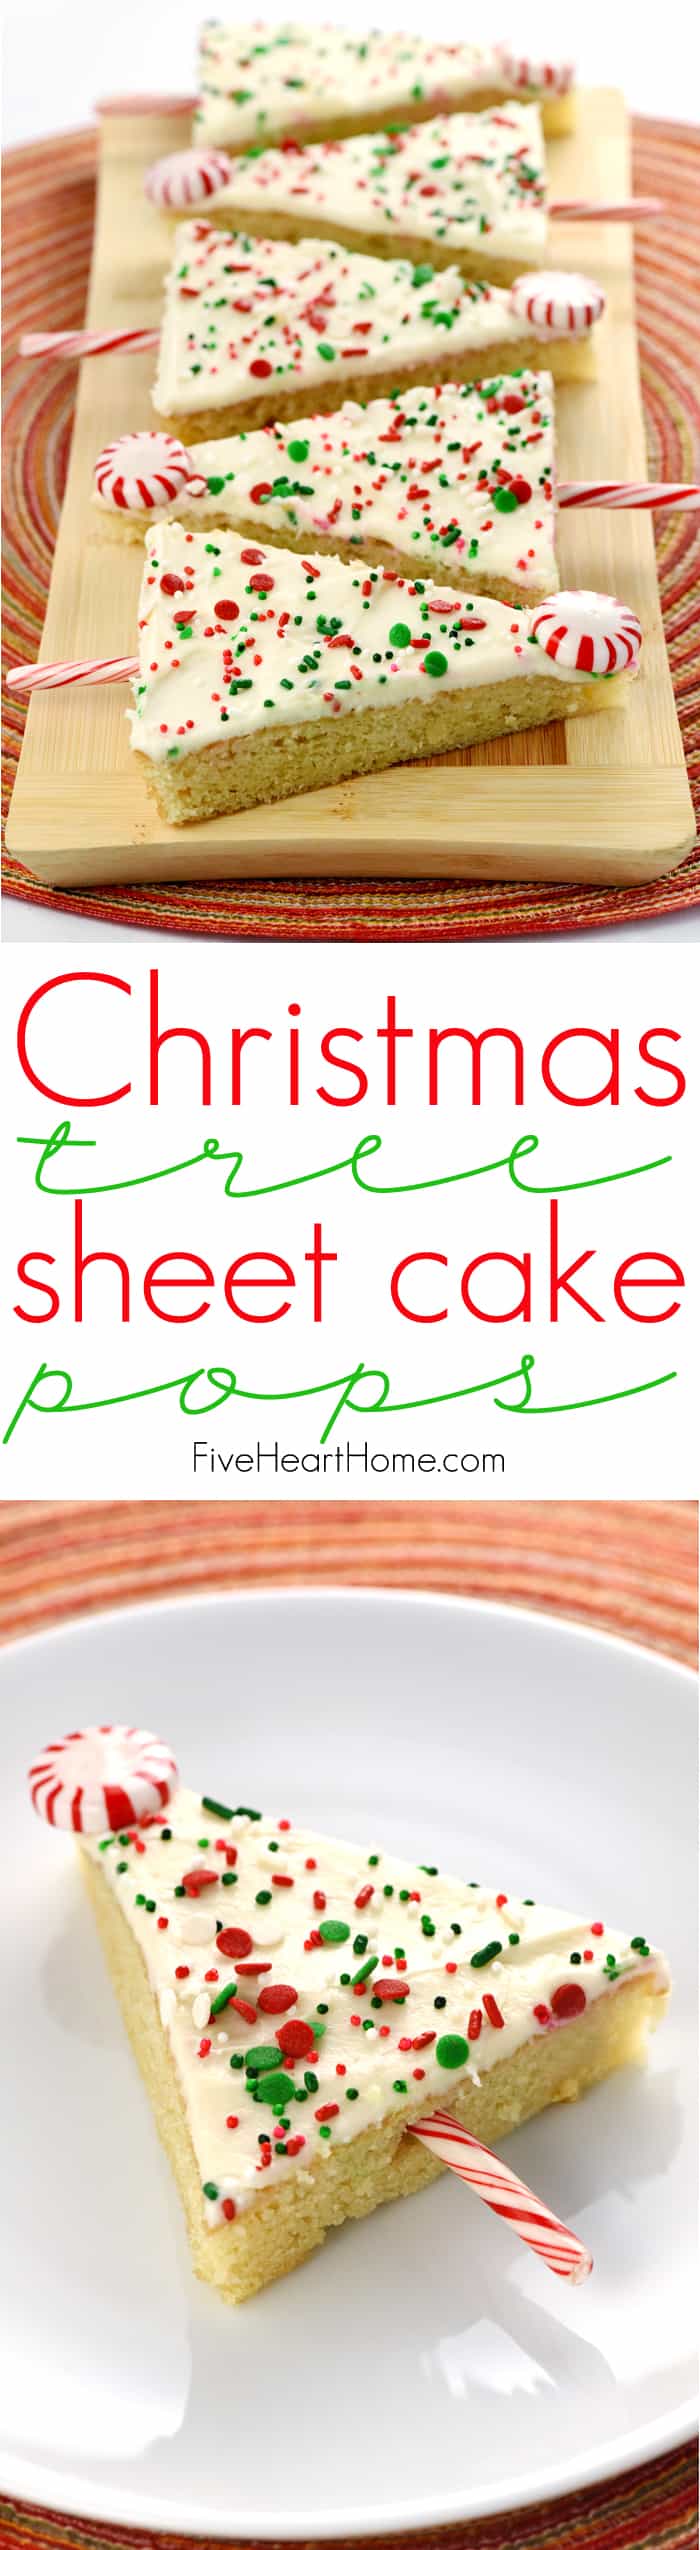 Christmas Sheet Cake ~ tender vanilla sheet cake is slathered in cream cheese frosting, showered with sprinkles, cut into triangles, and embellished with candy canes to make cute & festive Christmas trees! | FiveHeartHome.com via @fivehearthome